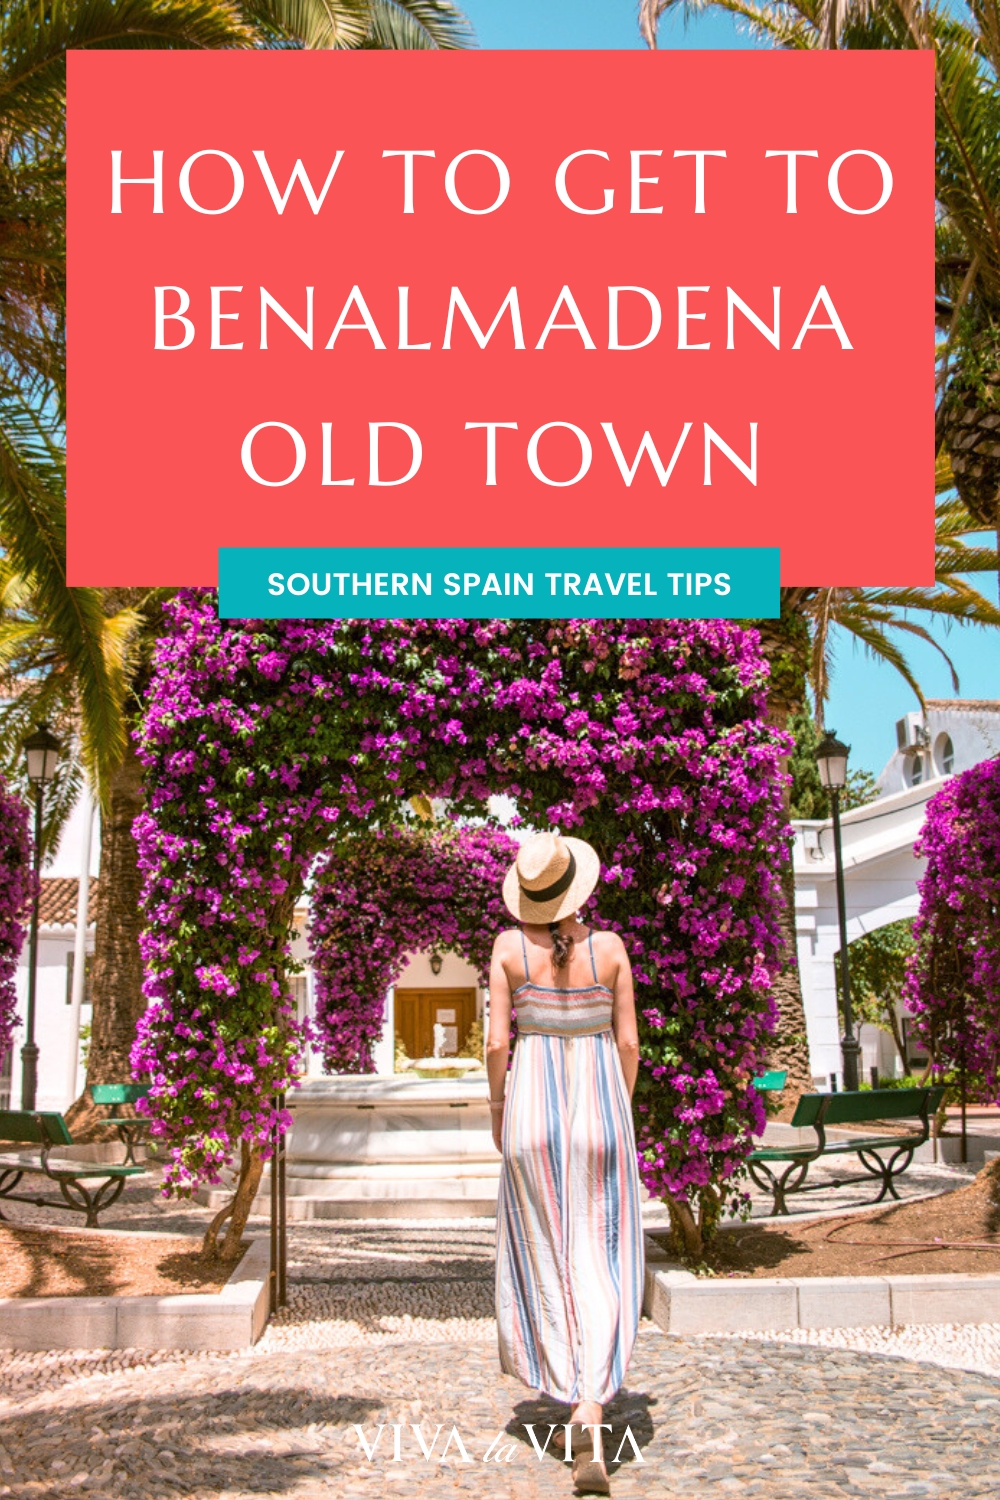 pinterest image showing a woman in benalmadena pueblo, with a headline: how to get to benalmadena old town, southern spain travel tips